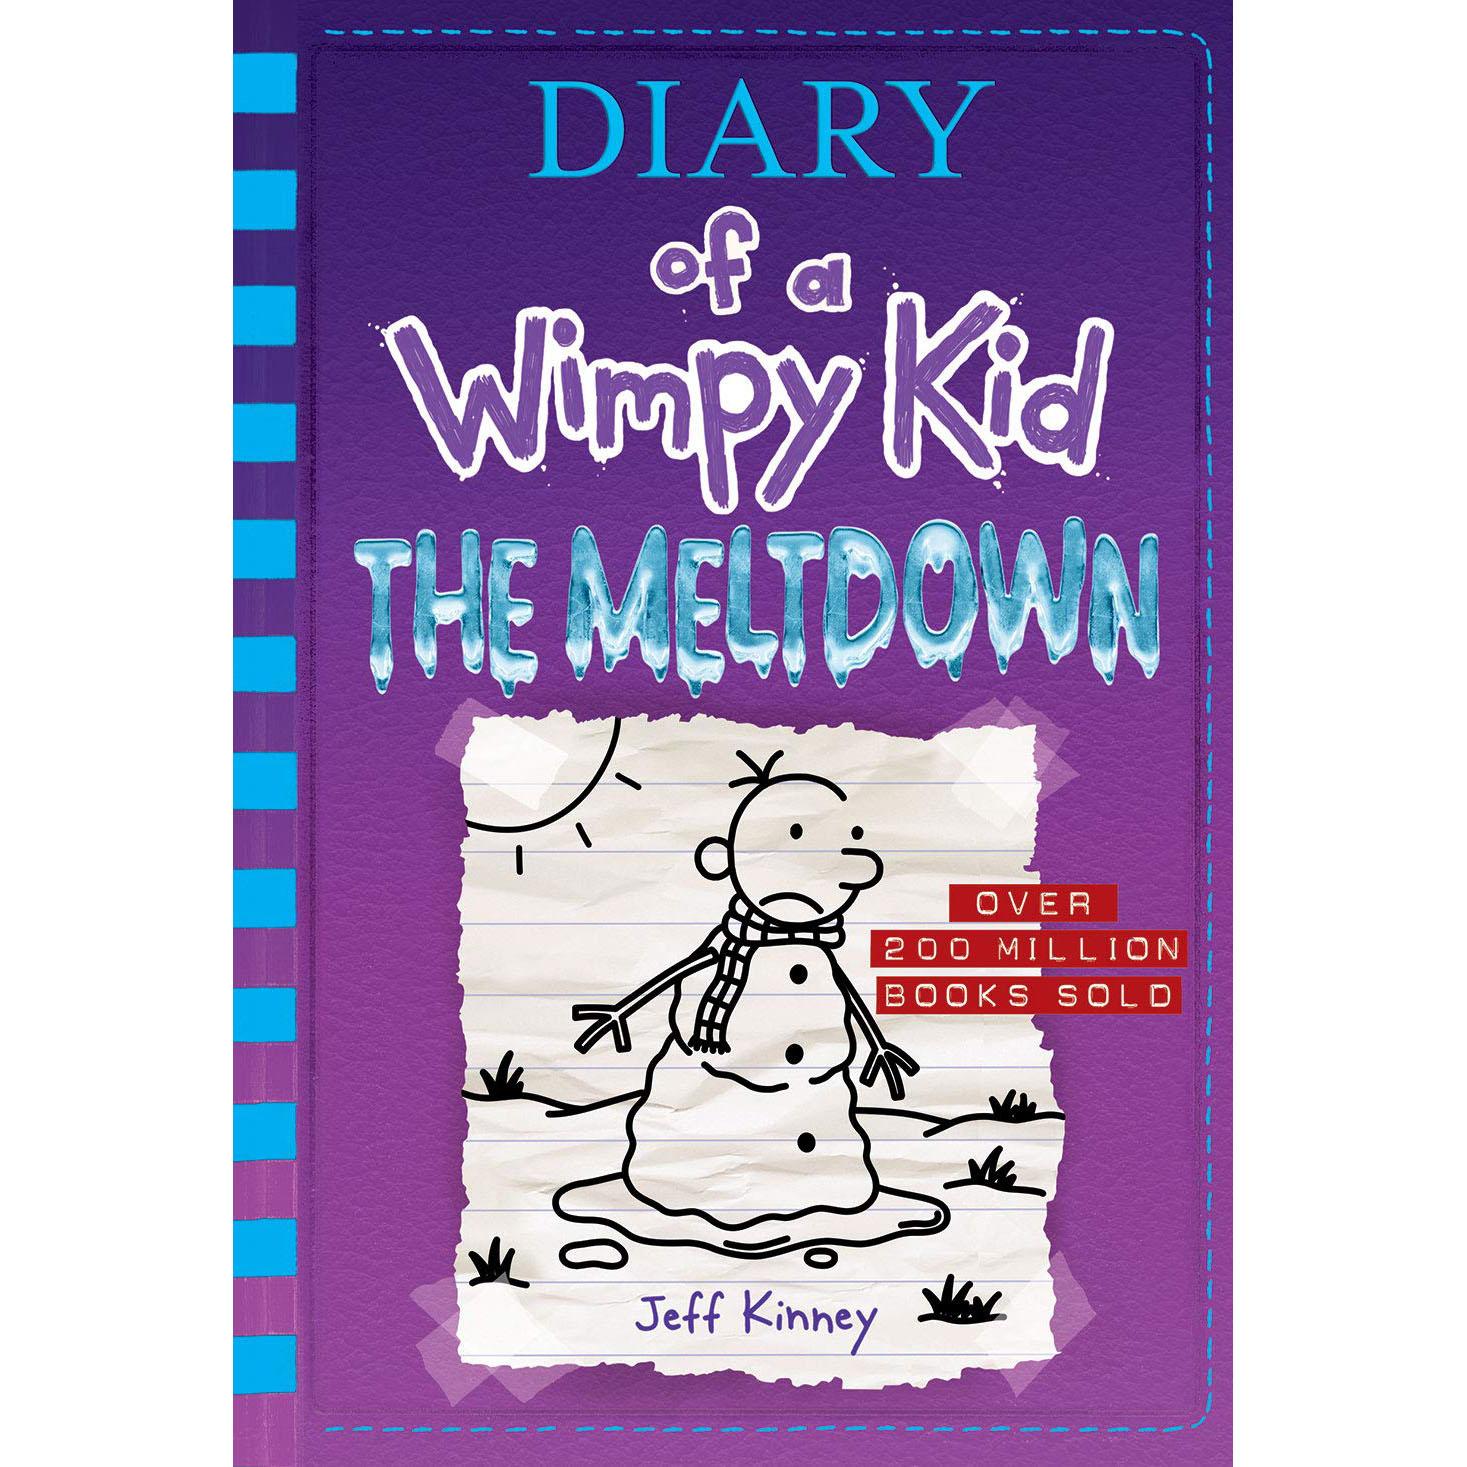 The Meltdown Diary of a Wimpy Kid Book 13 for $3.75